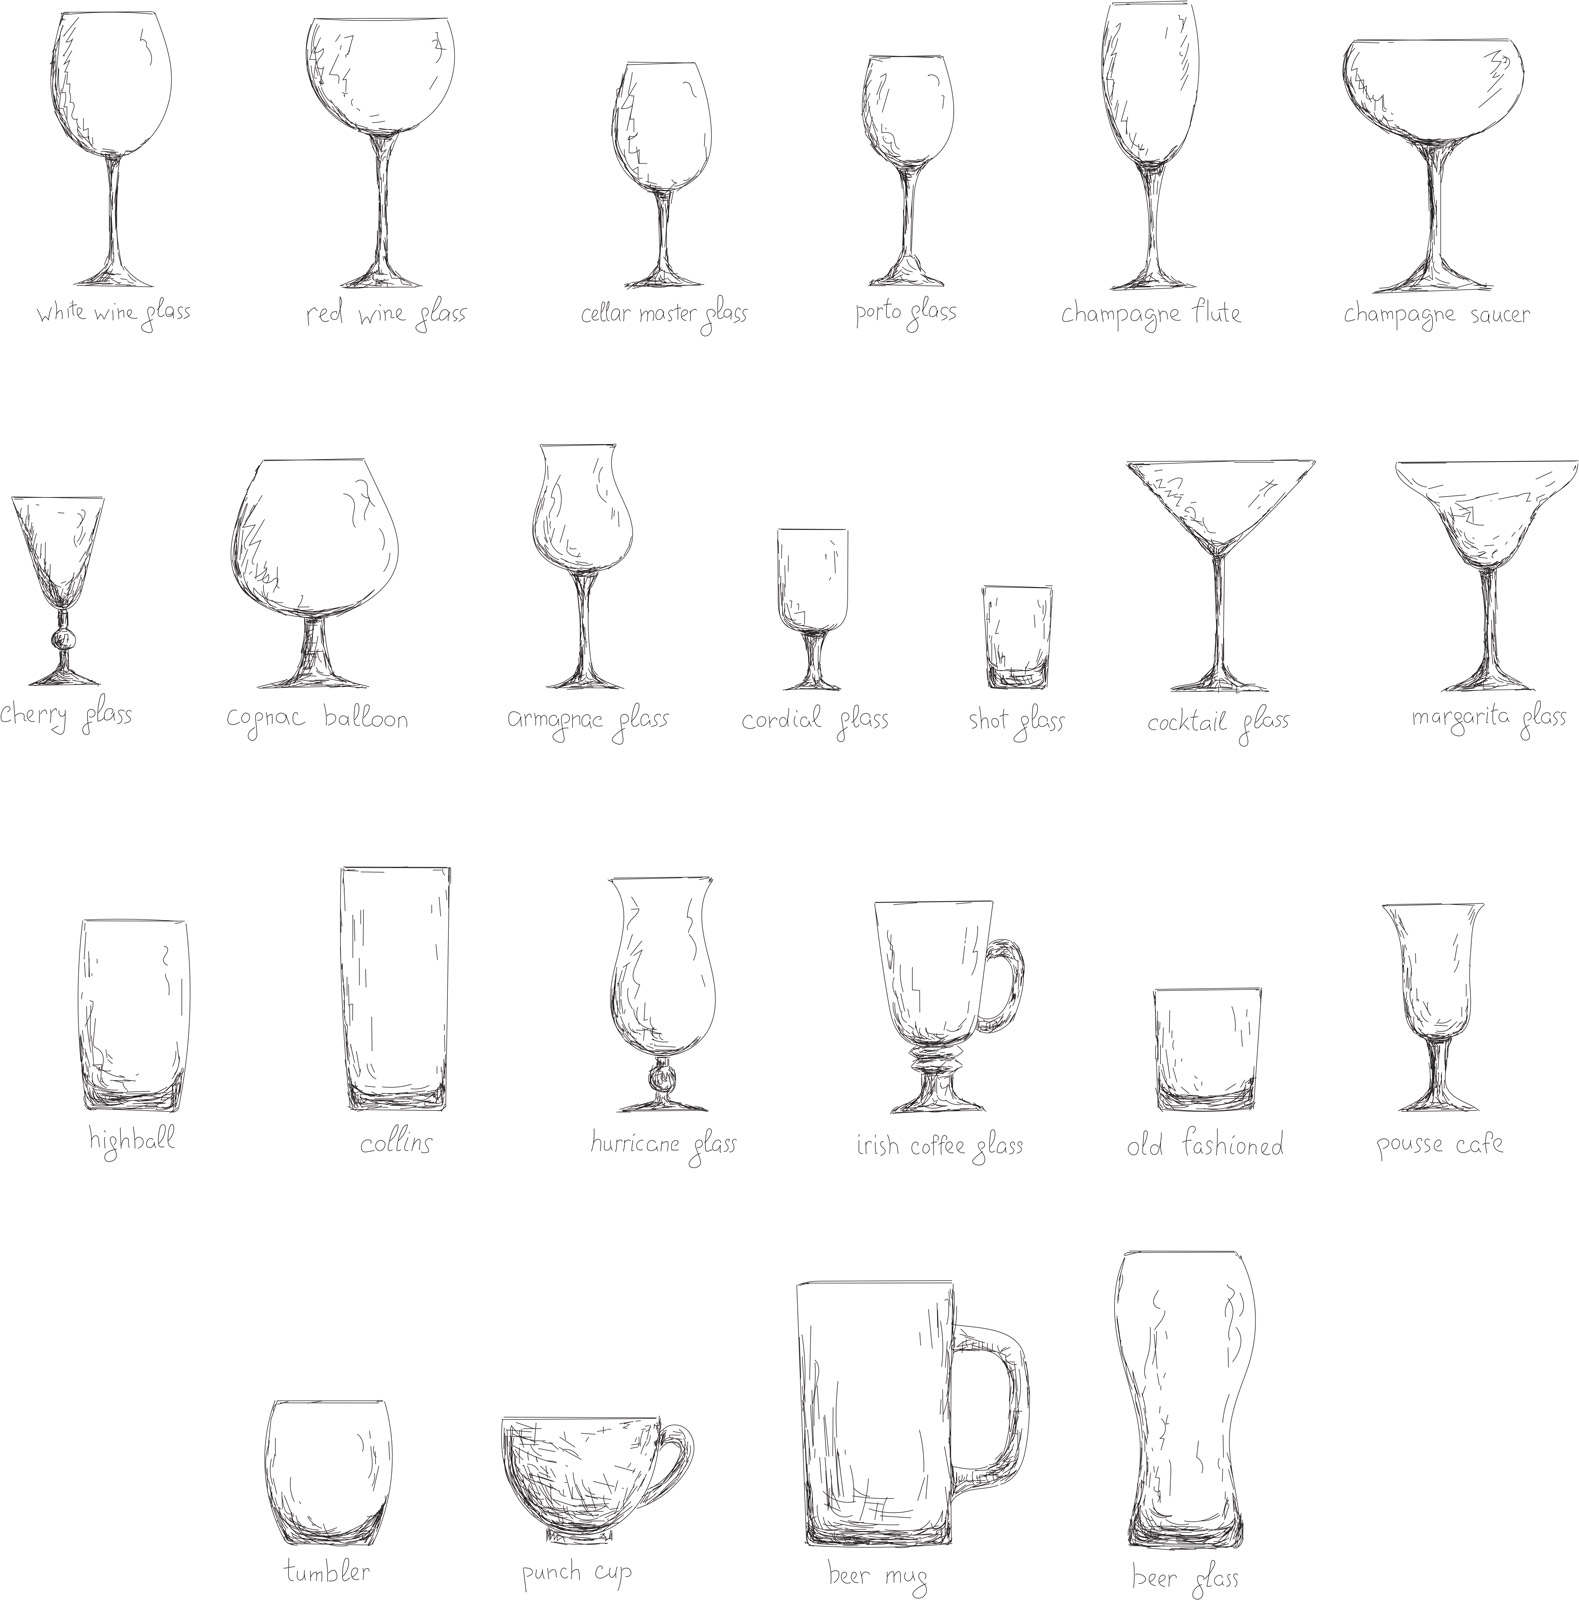 7 Different Glasses Design To Enhance Your Home Bar | Beautiful Homes